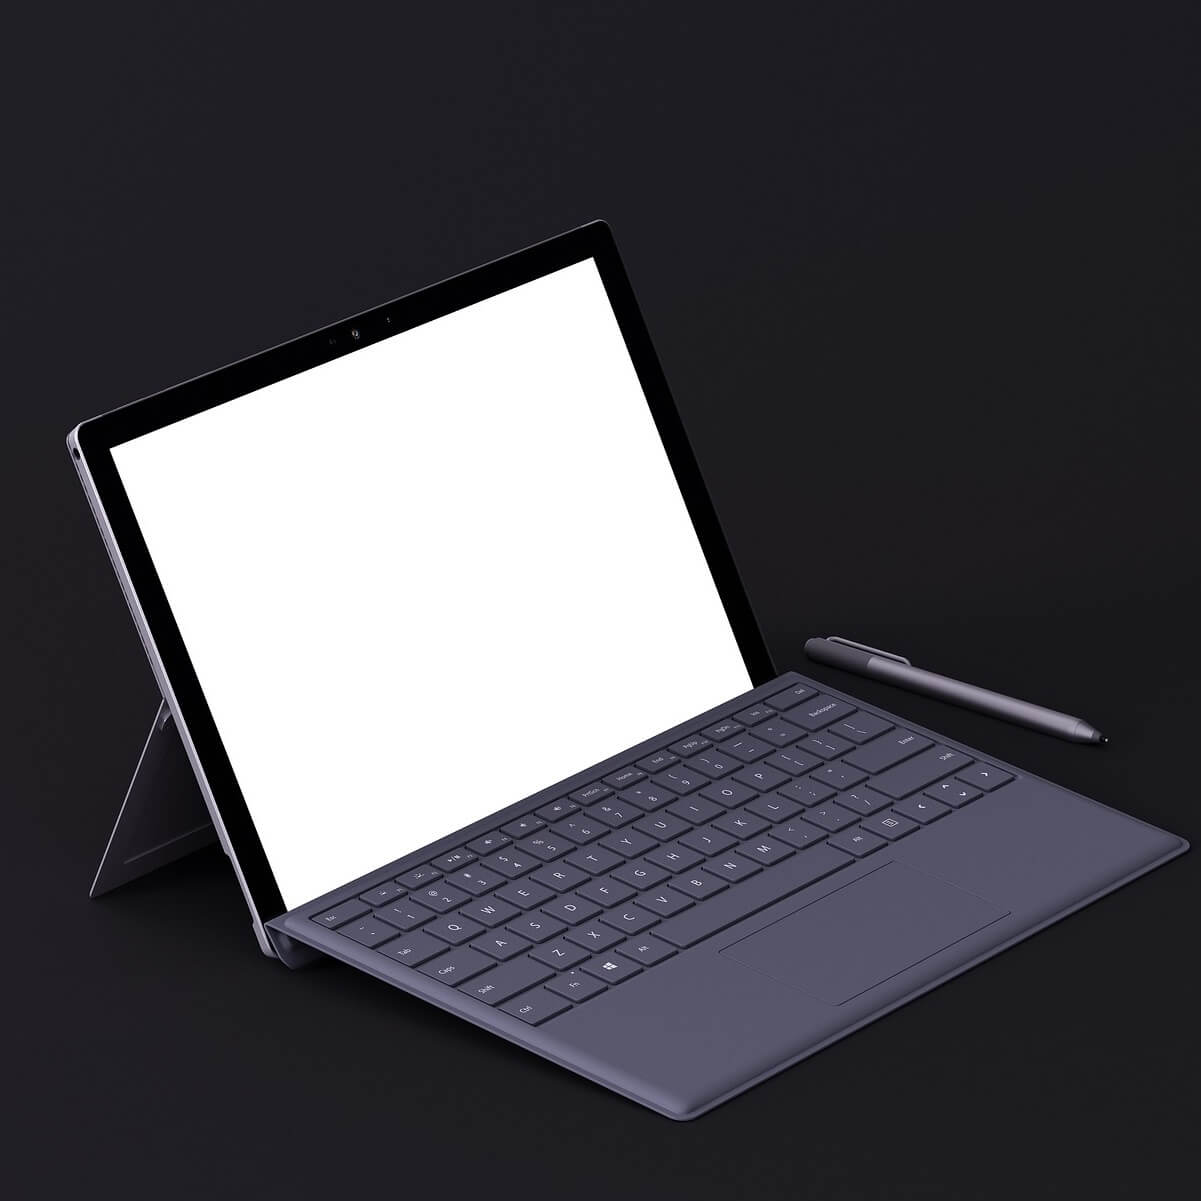 Foldable Surface device magnetic hinges